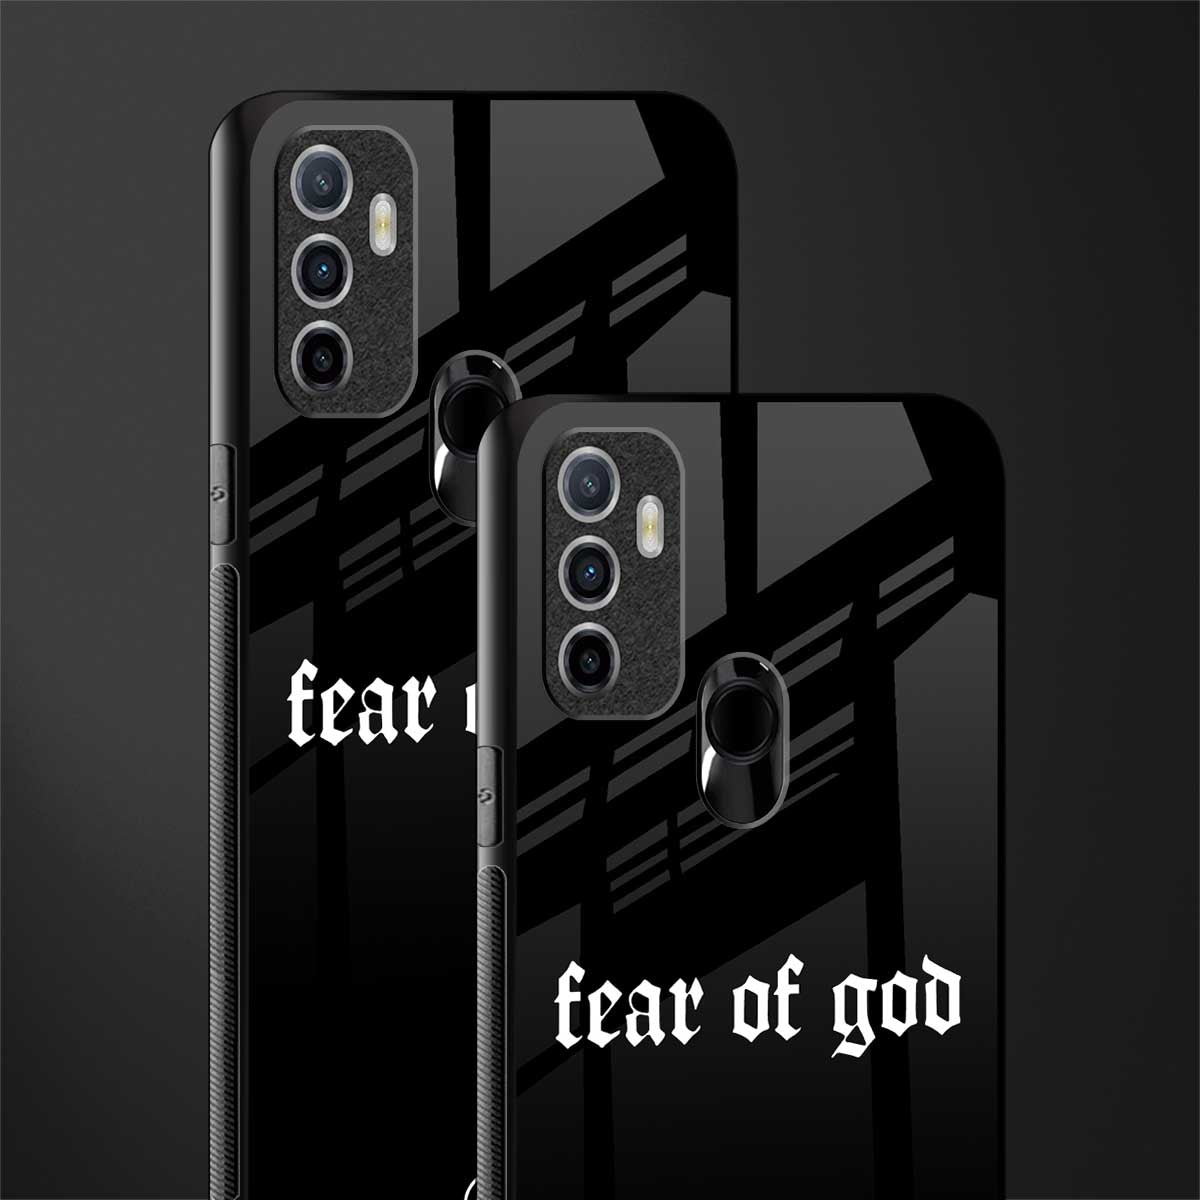 fear of god phone cover for oppo a53